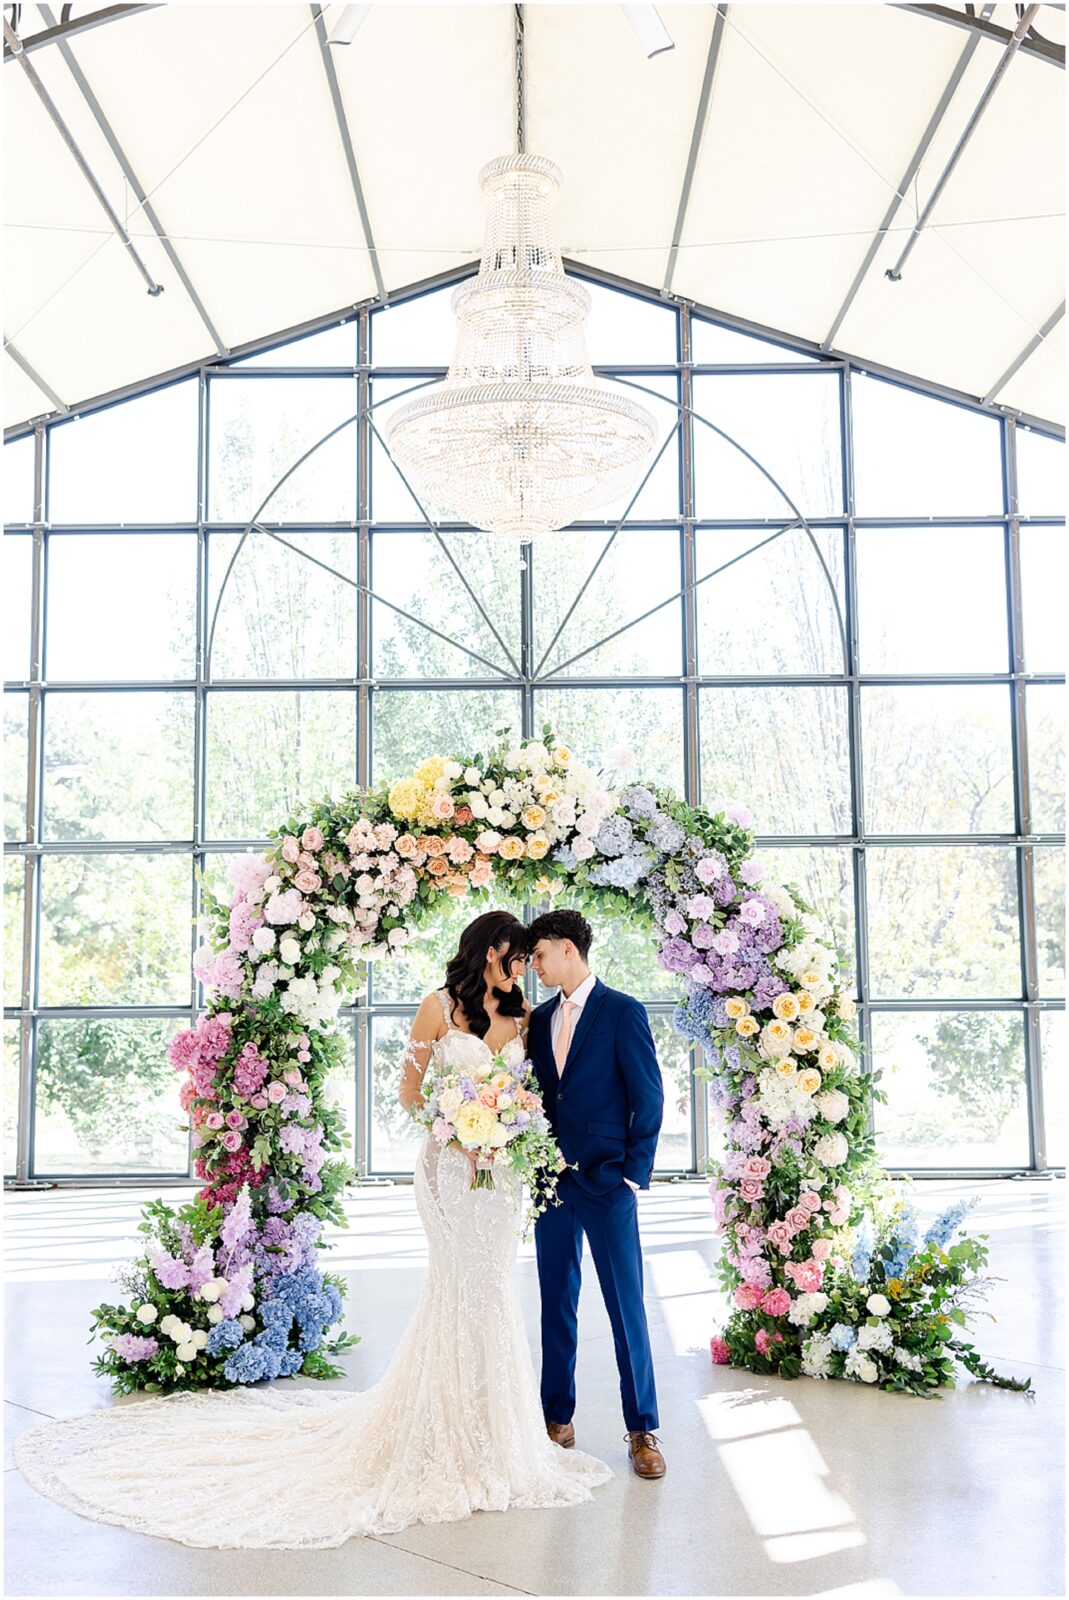 white lace wedding dress with long veil by the One Bridal in kansas city - Mariam Saifan Photography - luxury wedding photography based in KC and STL 30A Florida - Colorful pink flower arch for wedding - italian wedding theme - garden wedding theme  - avent orangery - hair by ezoza 